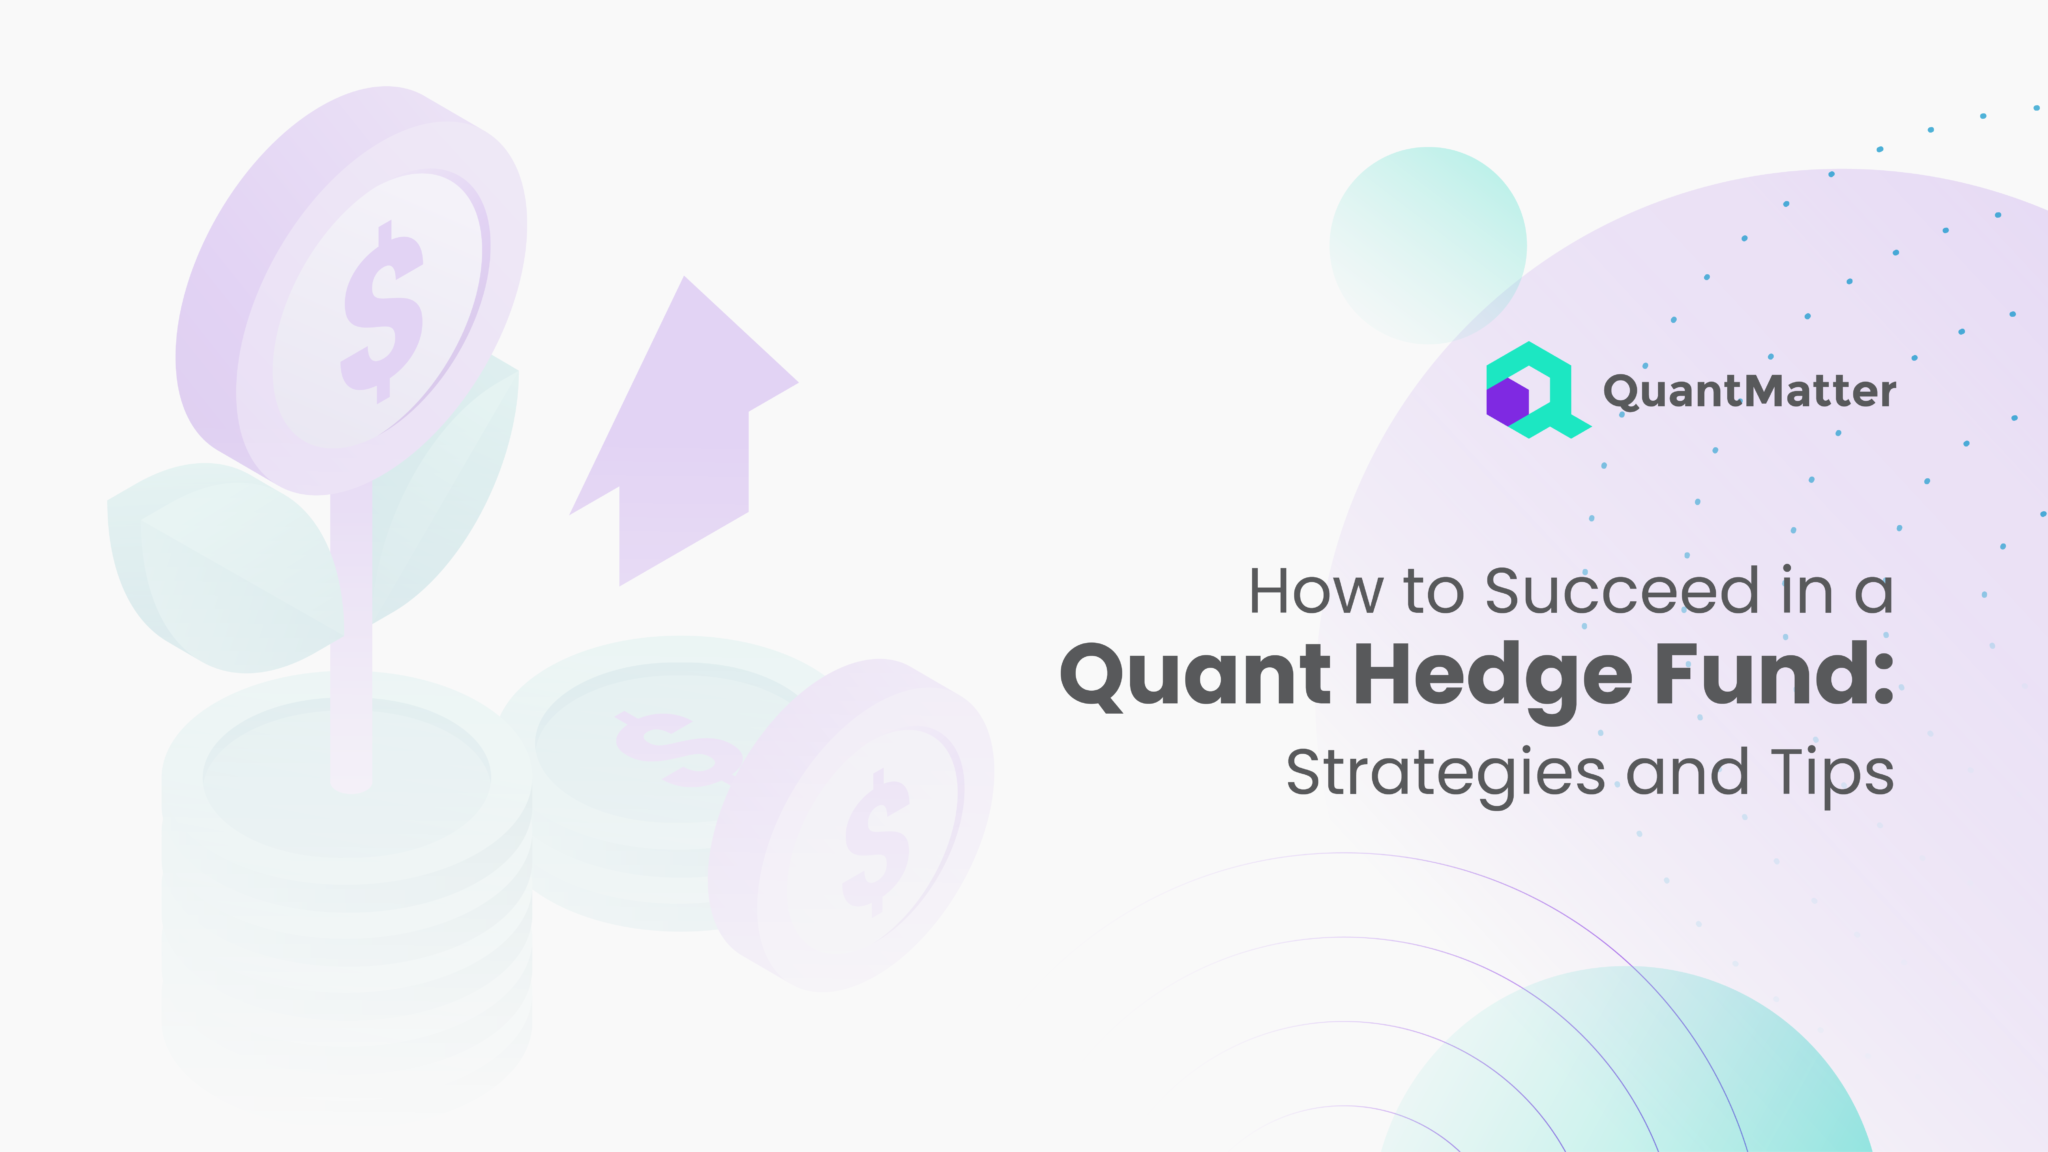 How to Succeed in a Quant Hedge Fund: Strategies and Tips